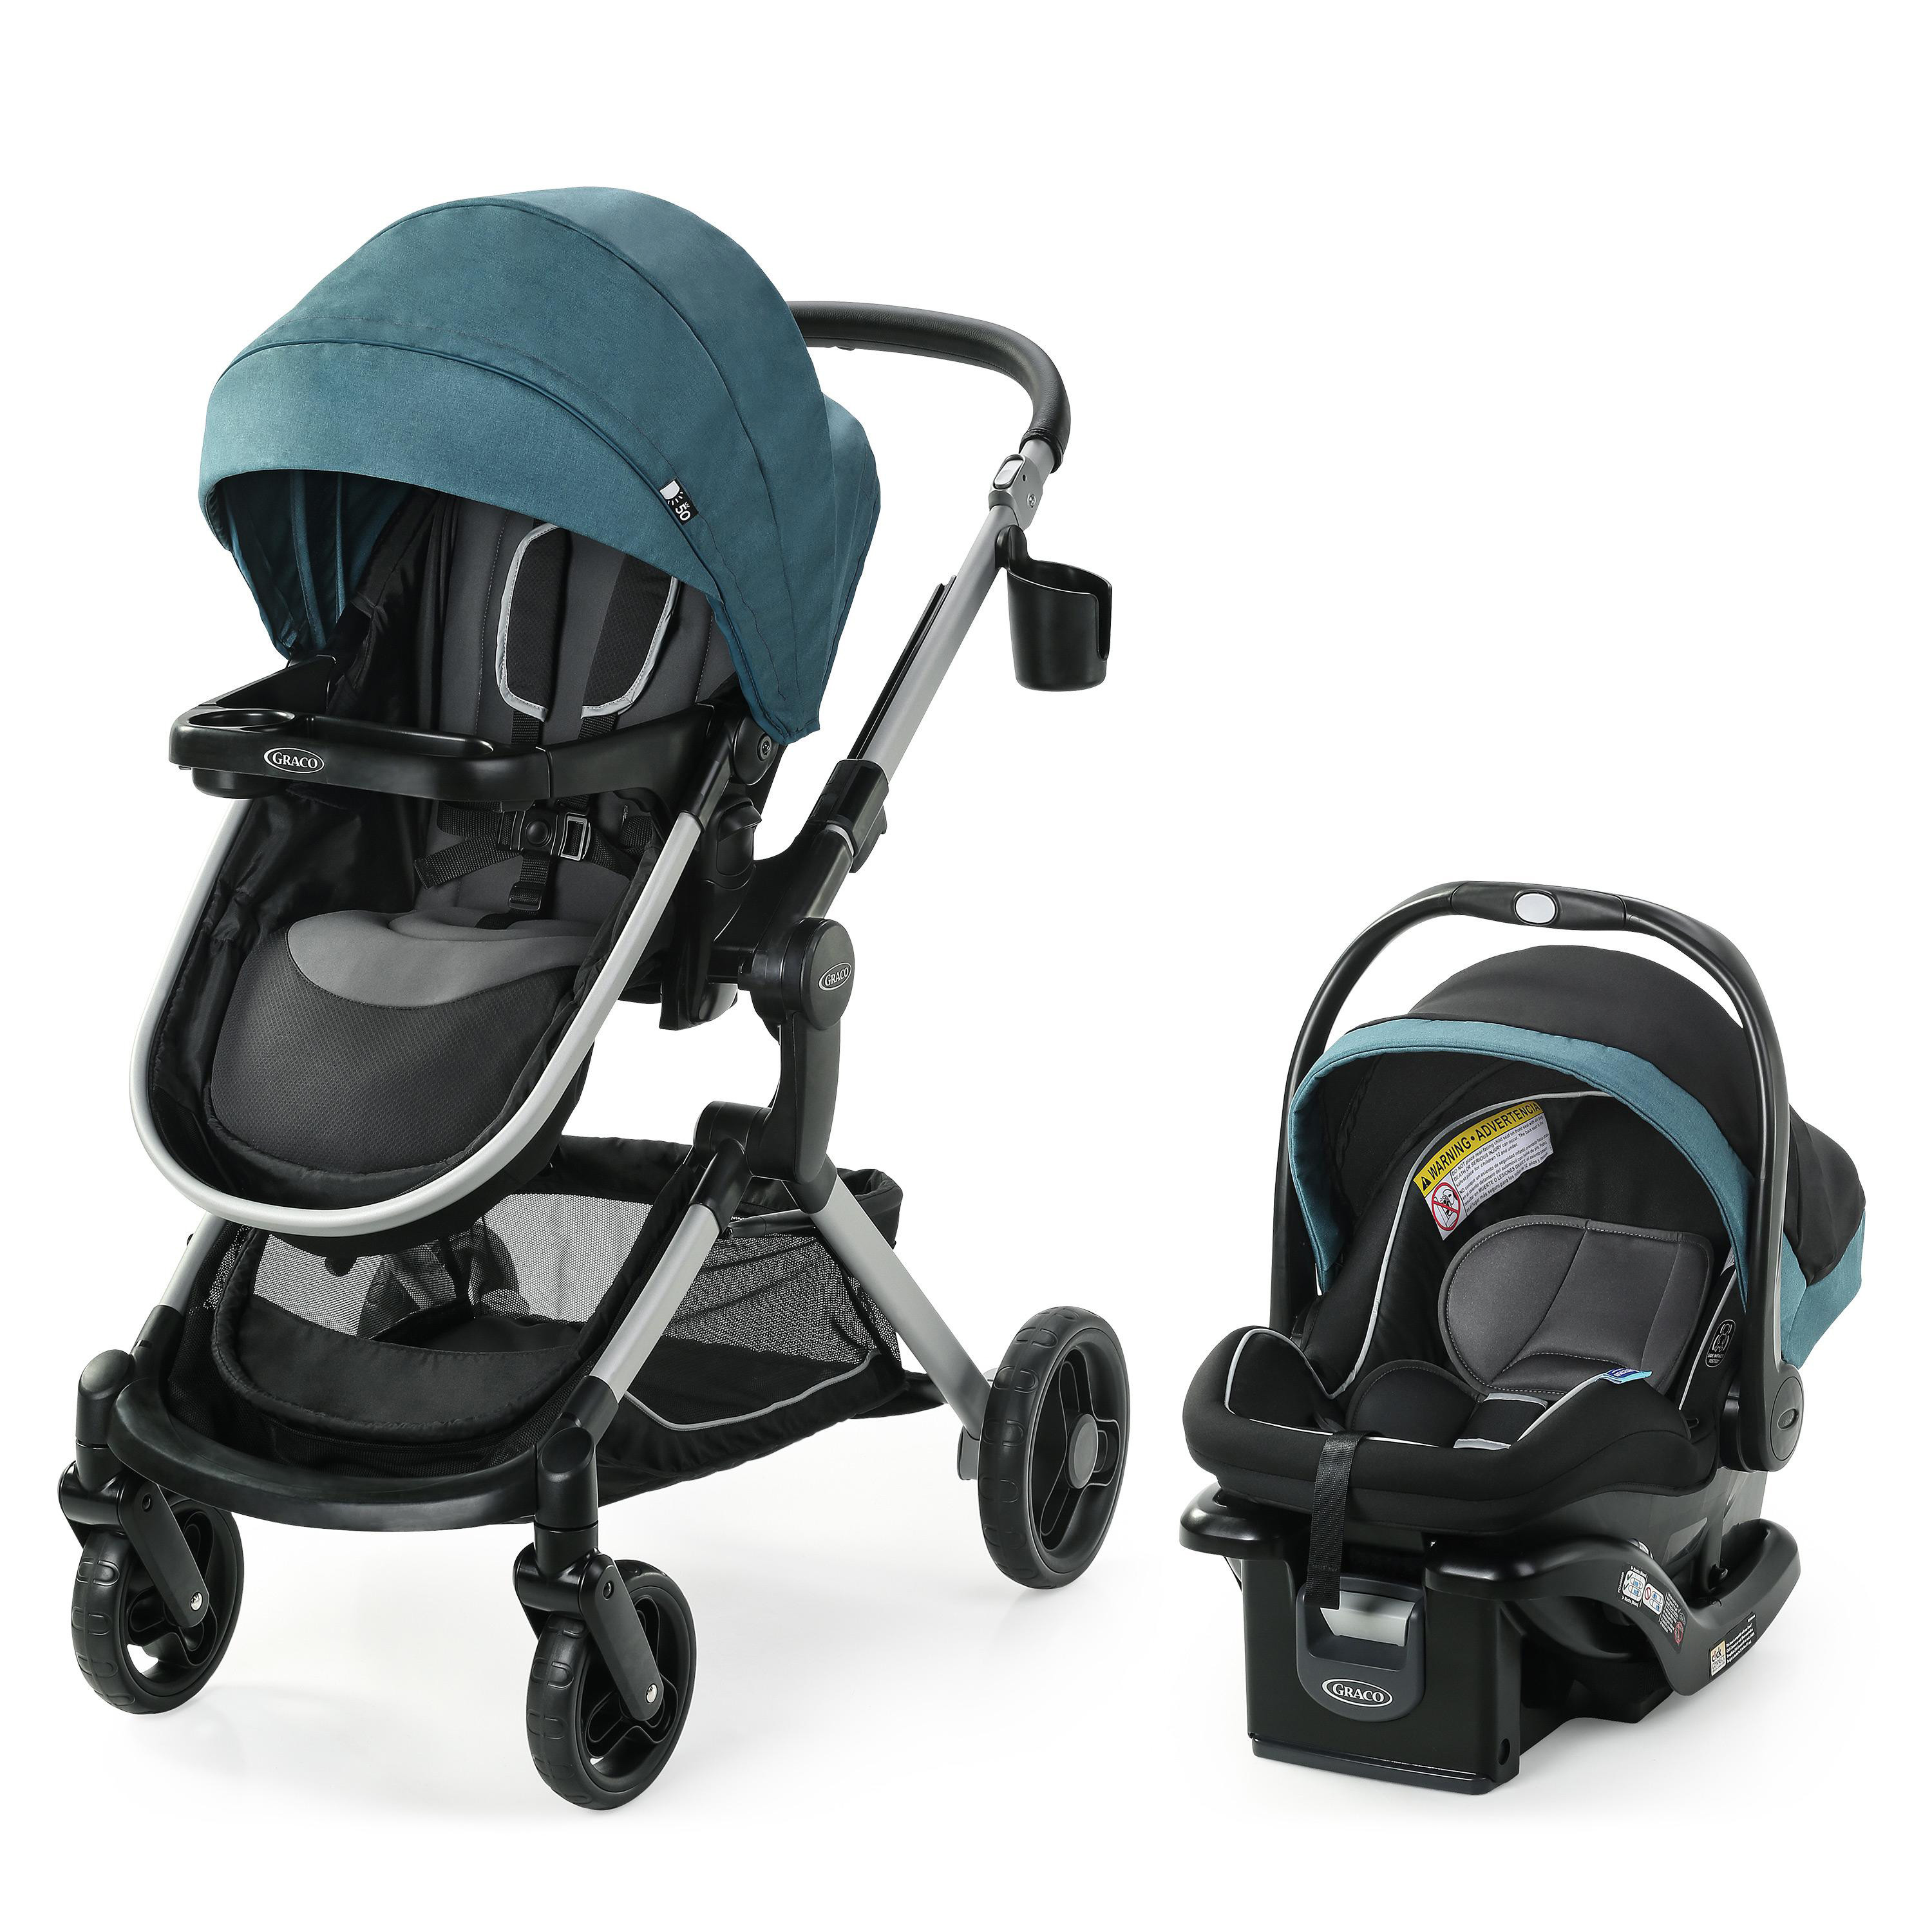 Graco® Modes ™ Nest Travel System, Bayfield - image 1 of 7